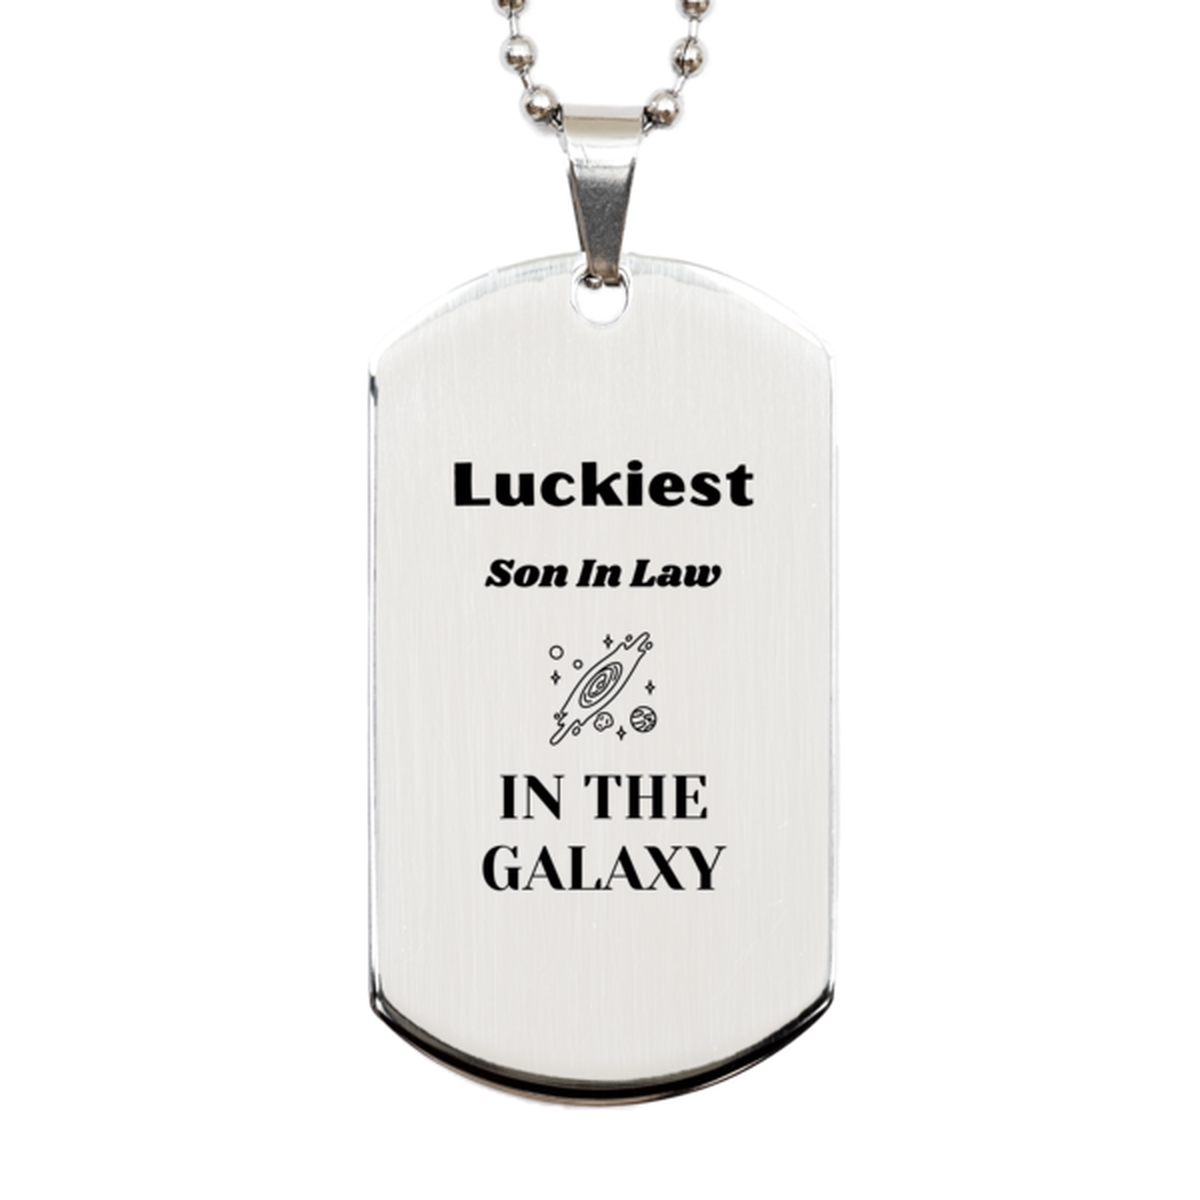 Luckiest Son In Law in the Galaxy, To My Son In Law Engraved Gifts, Christmas Son In Law Silver Dog Tag Gifts, X-mas Birthday Unique Gifts For Son In Law Men Women